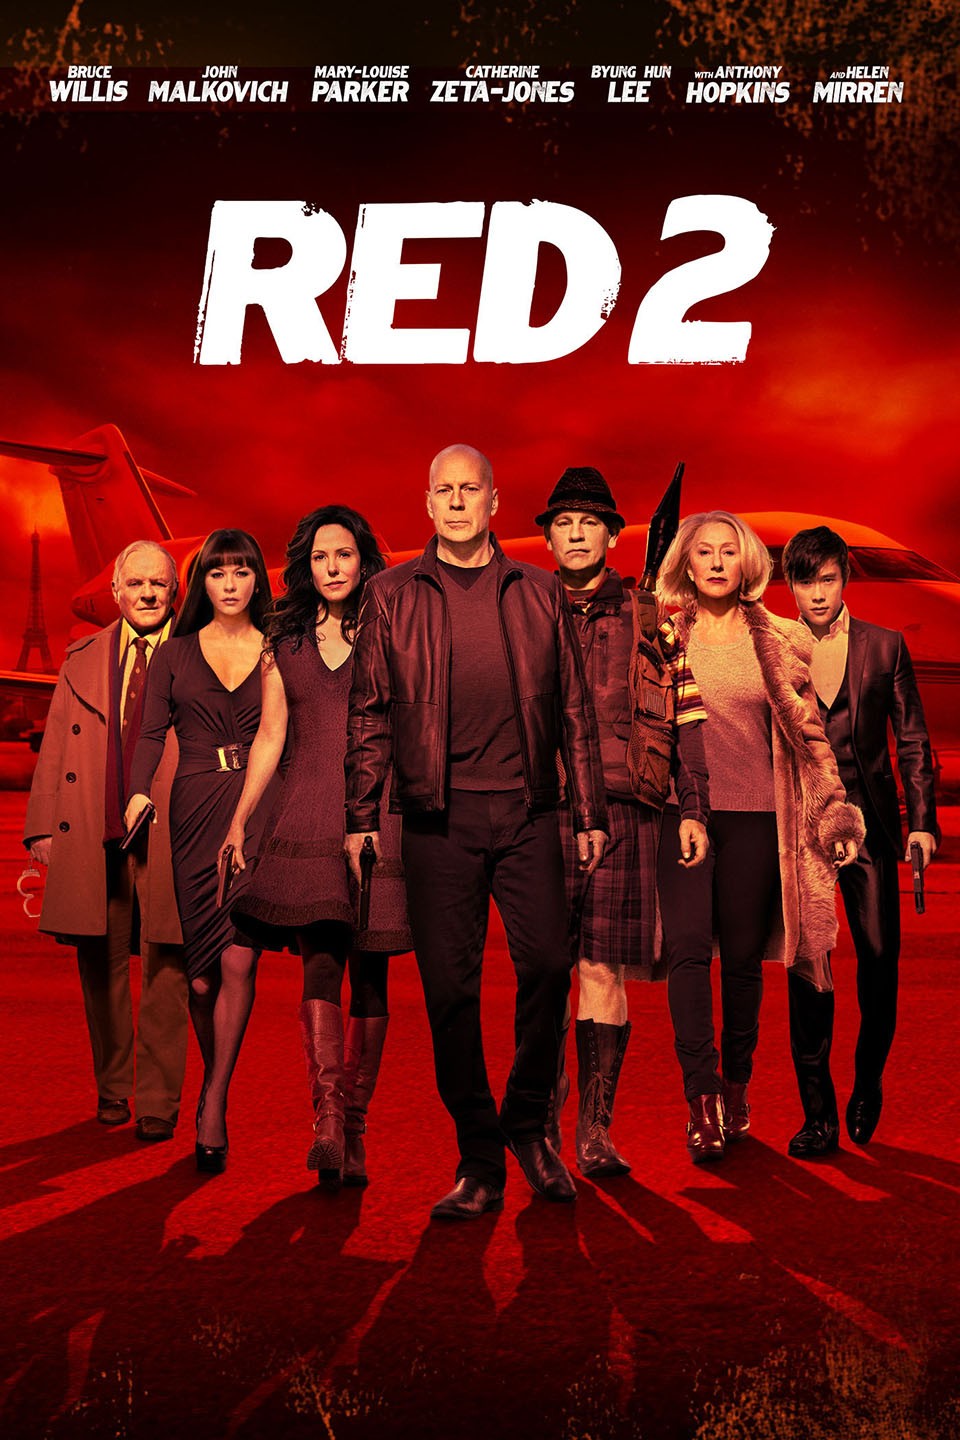 Red 2' Review: More Is Less in Action-Comedy Sequel